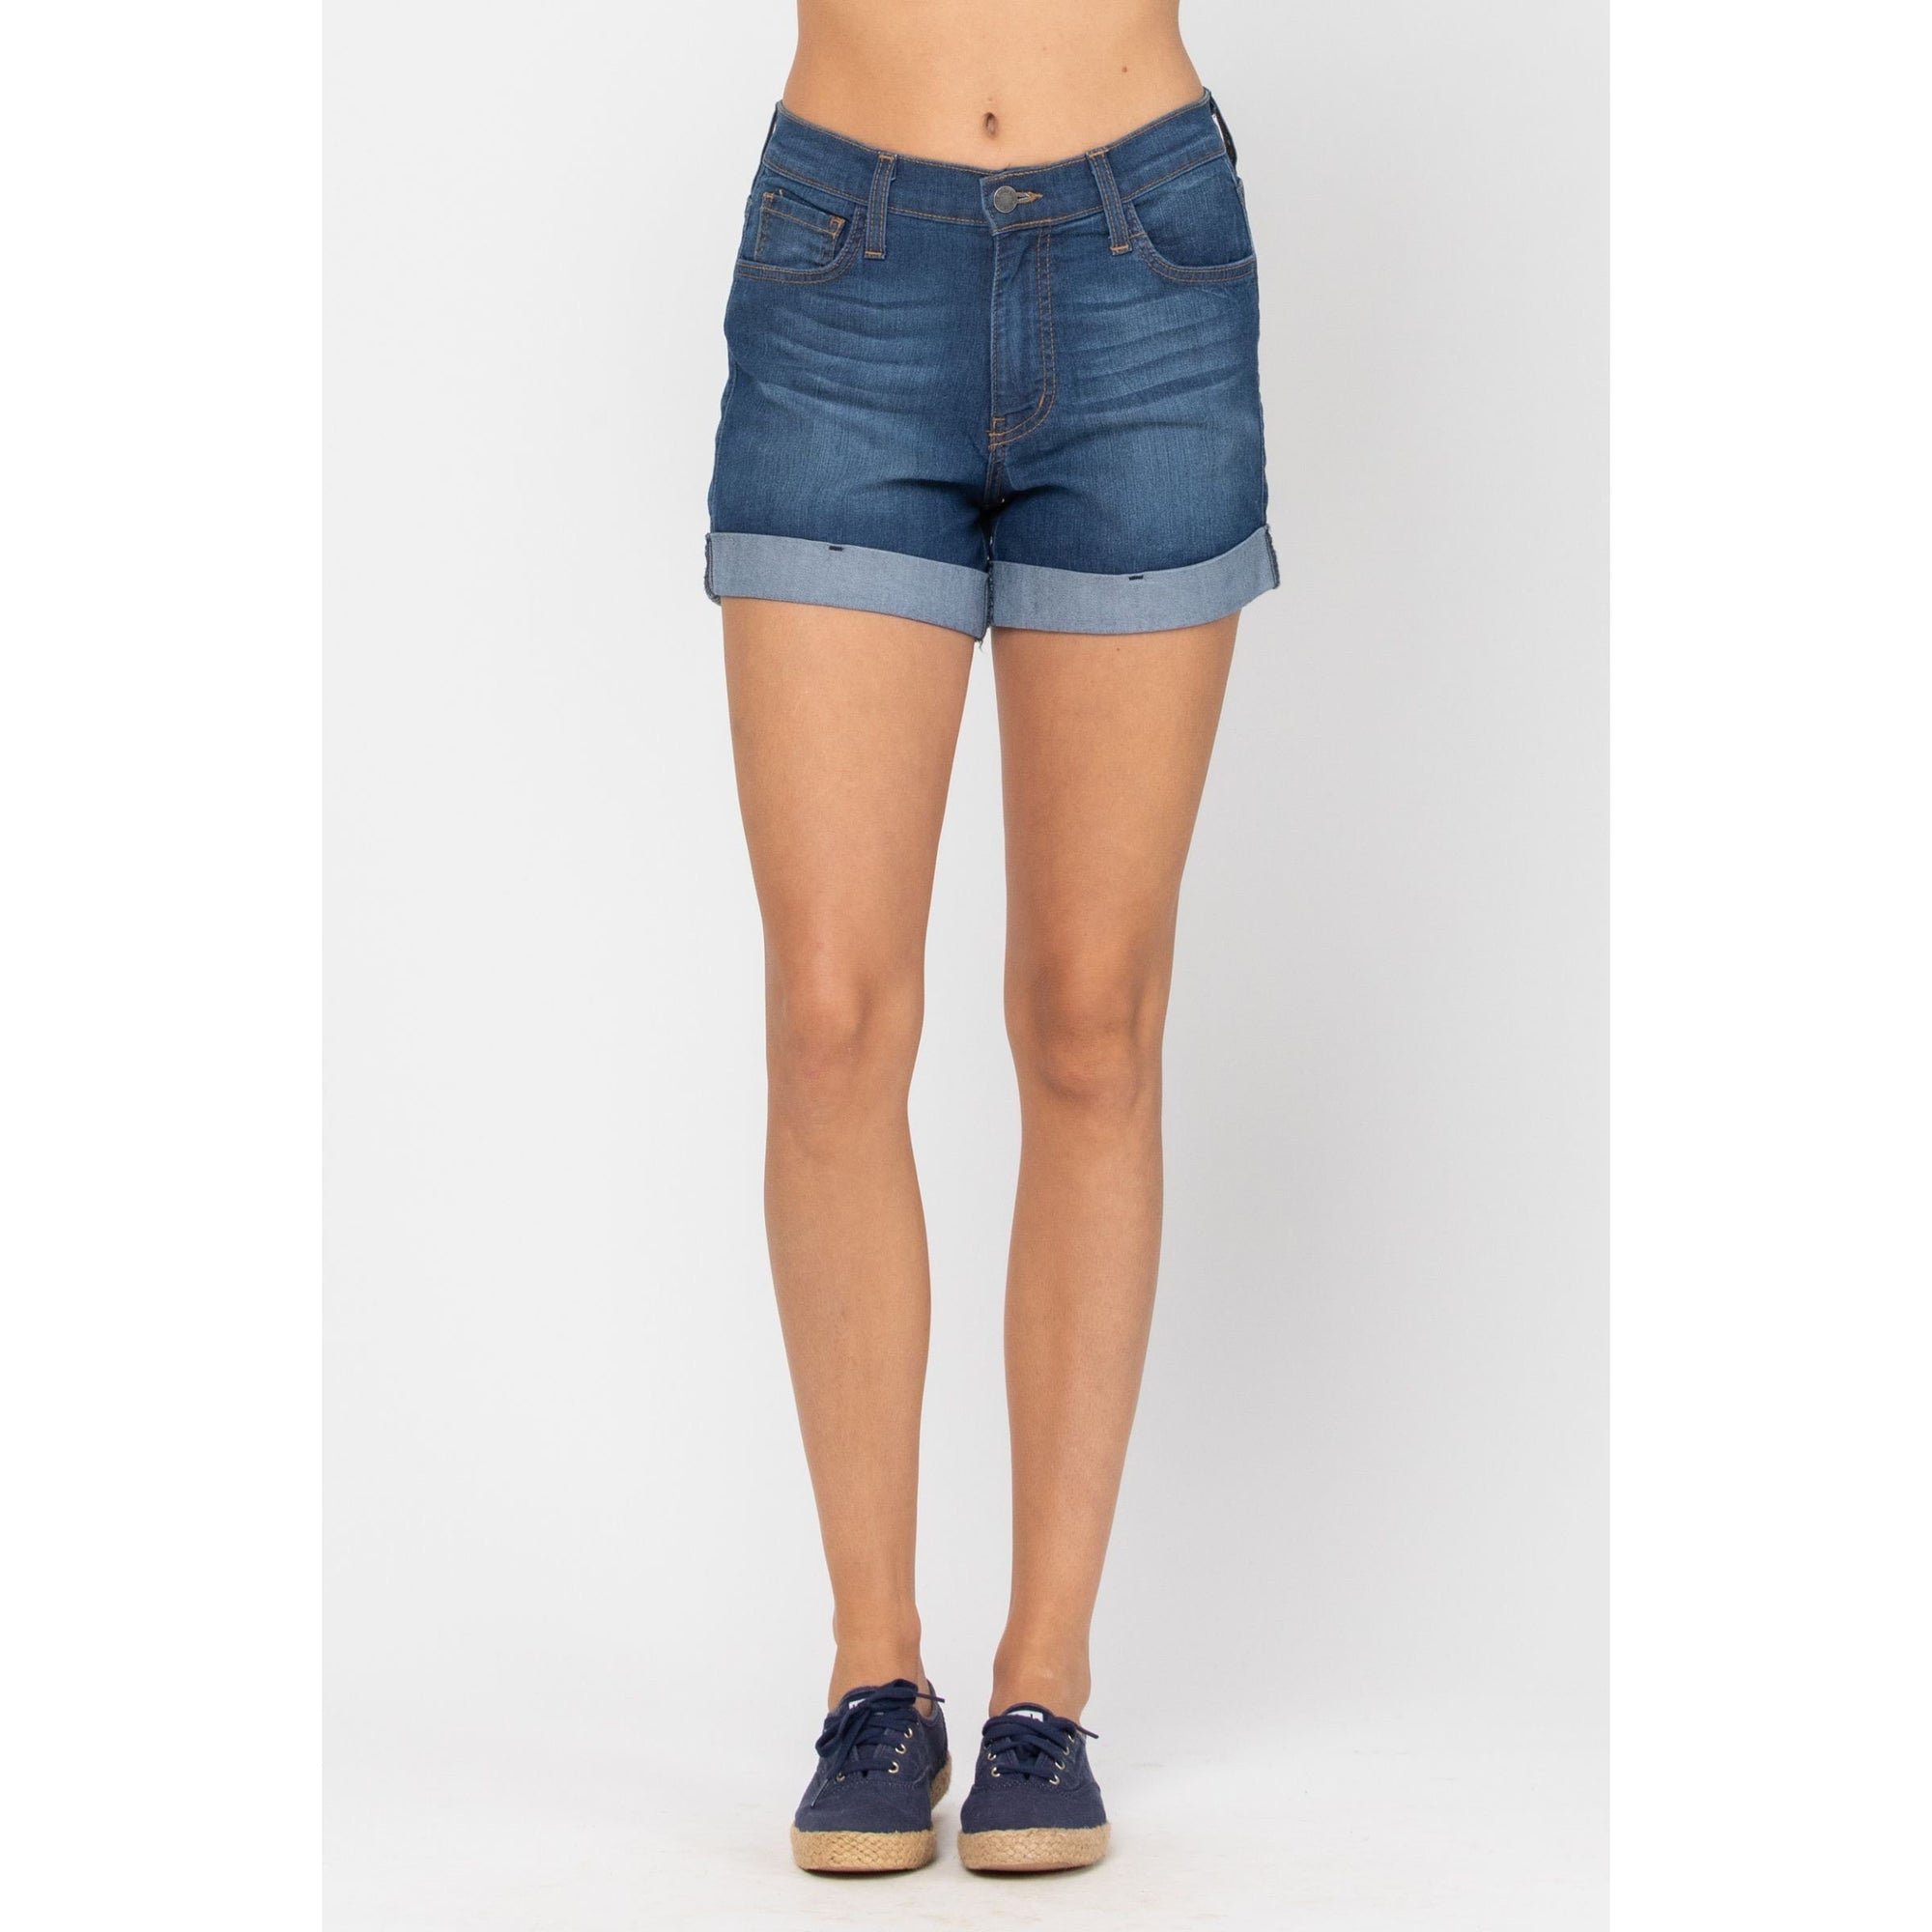 Judy Blue High Waisted Cuffed Shorts - Style 18163 - Made in the USA